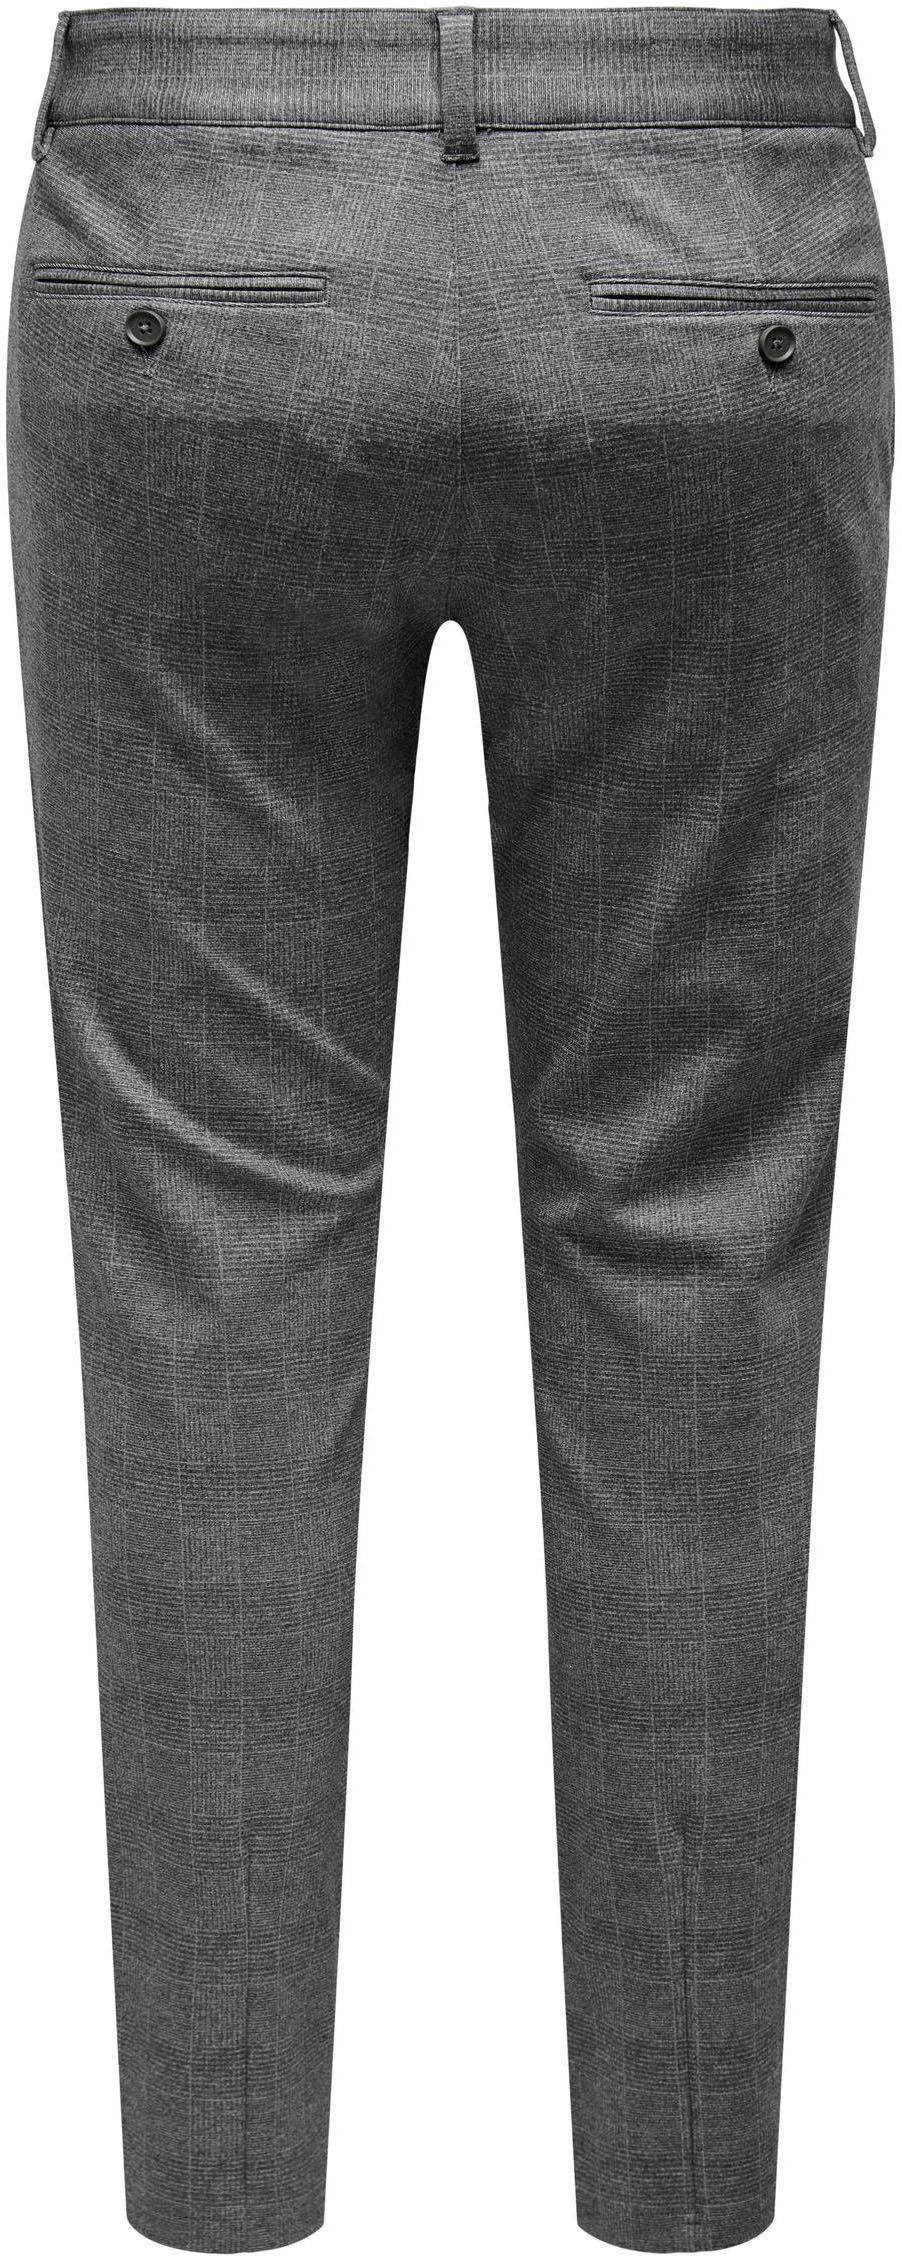 PANTS Chinohose limestone MARK ONLY SONS CHECK &